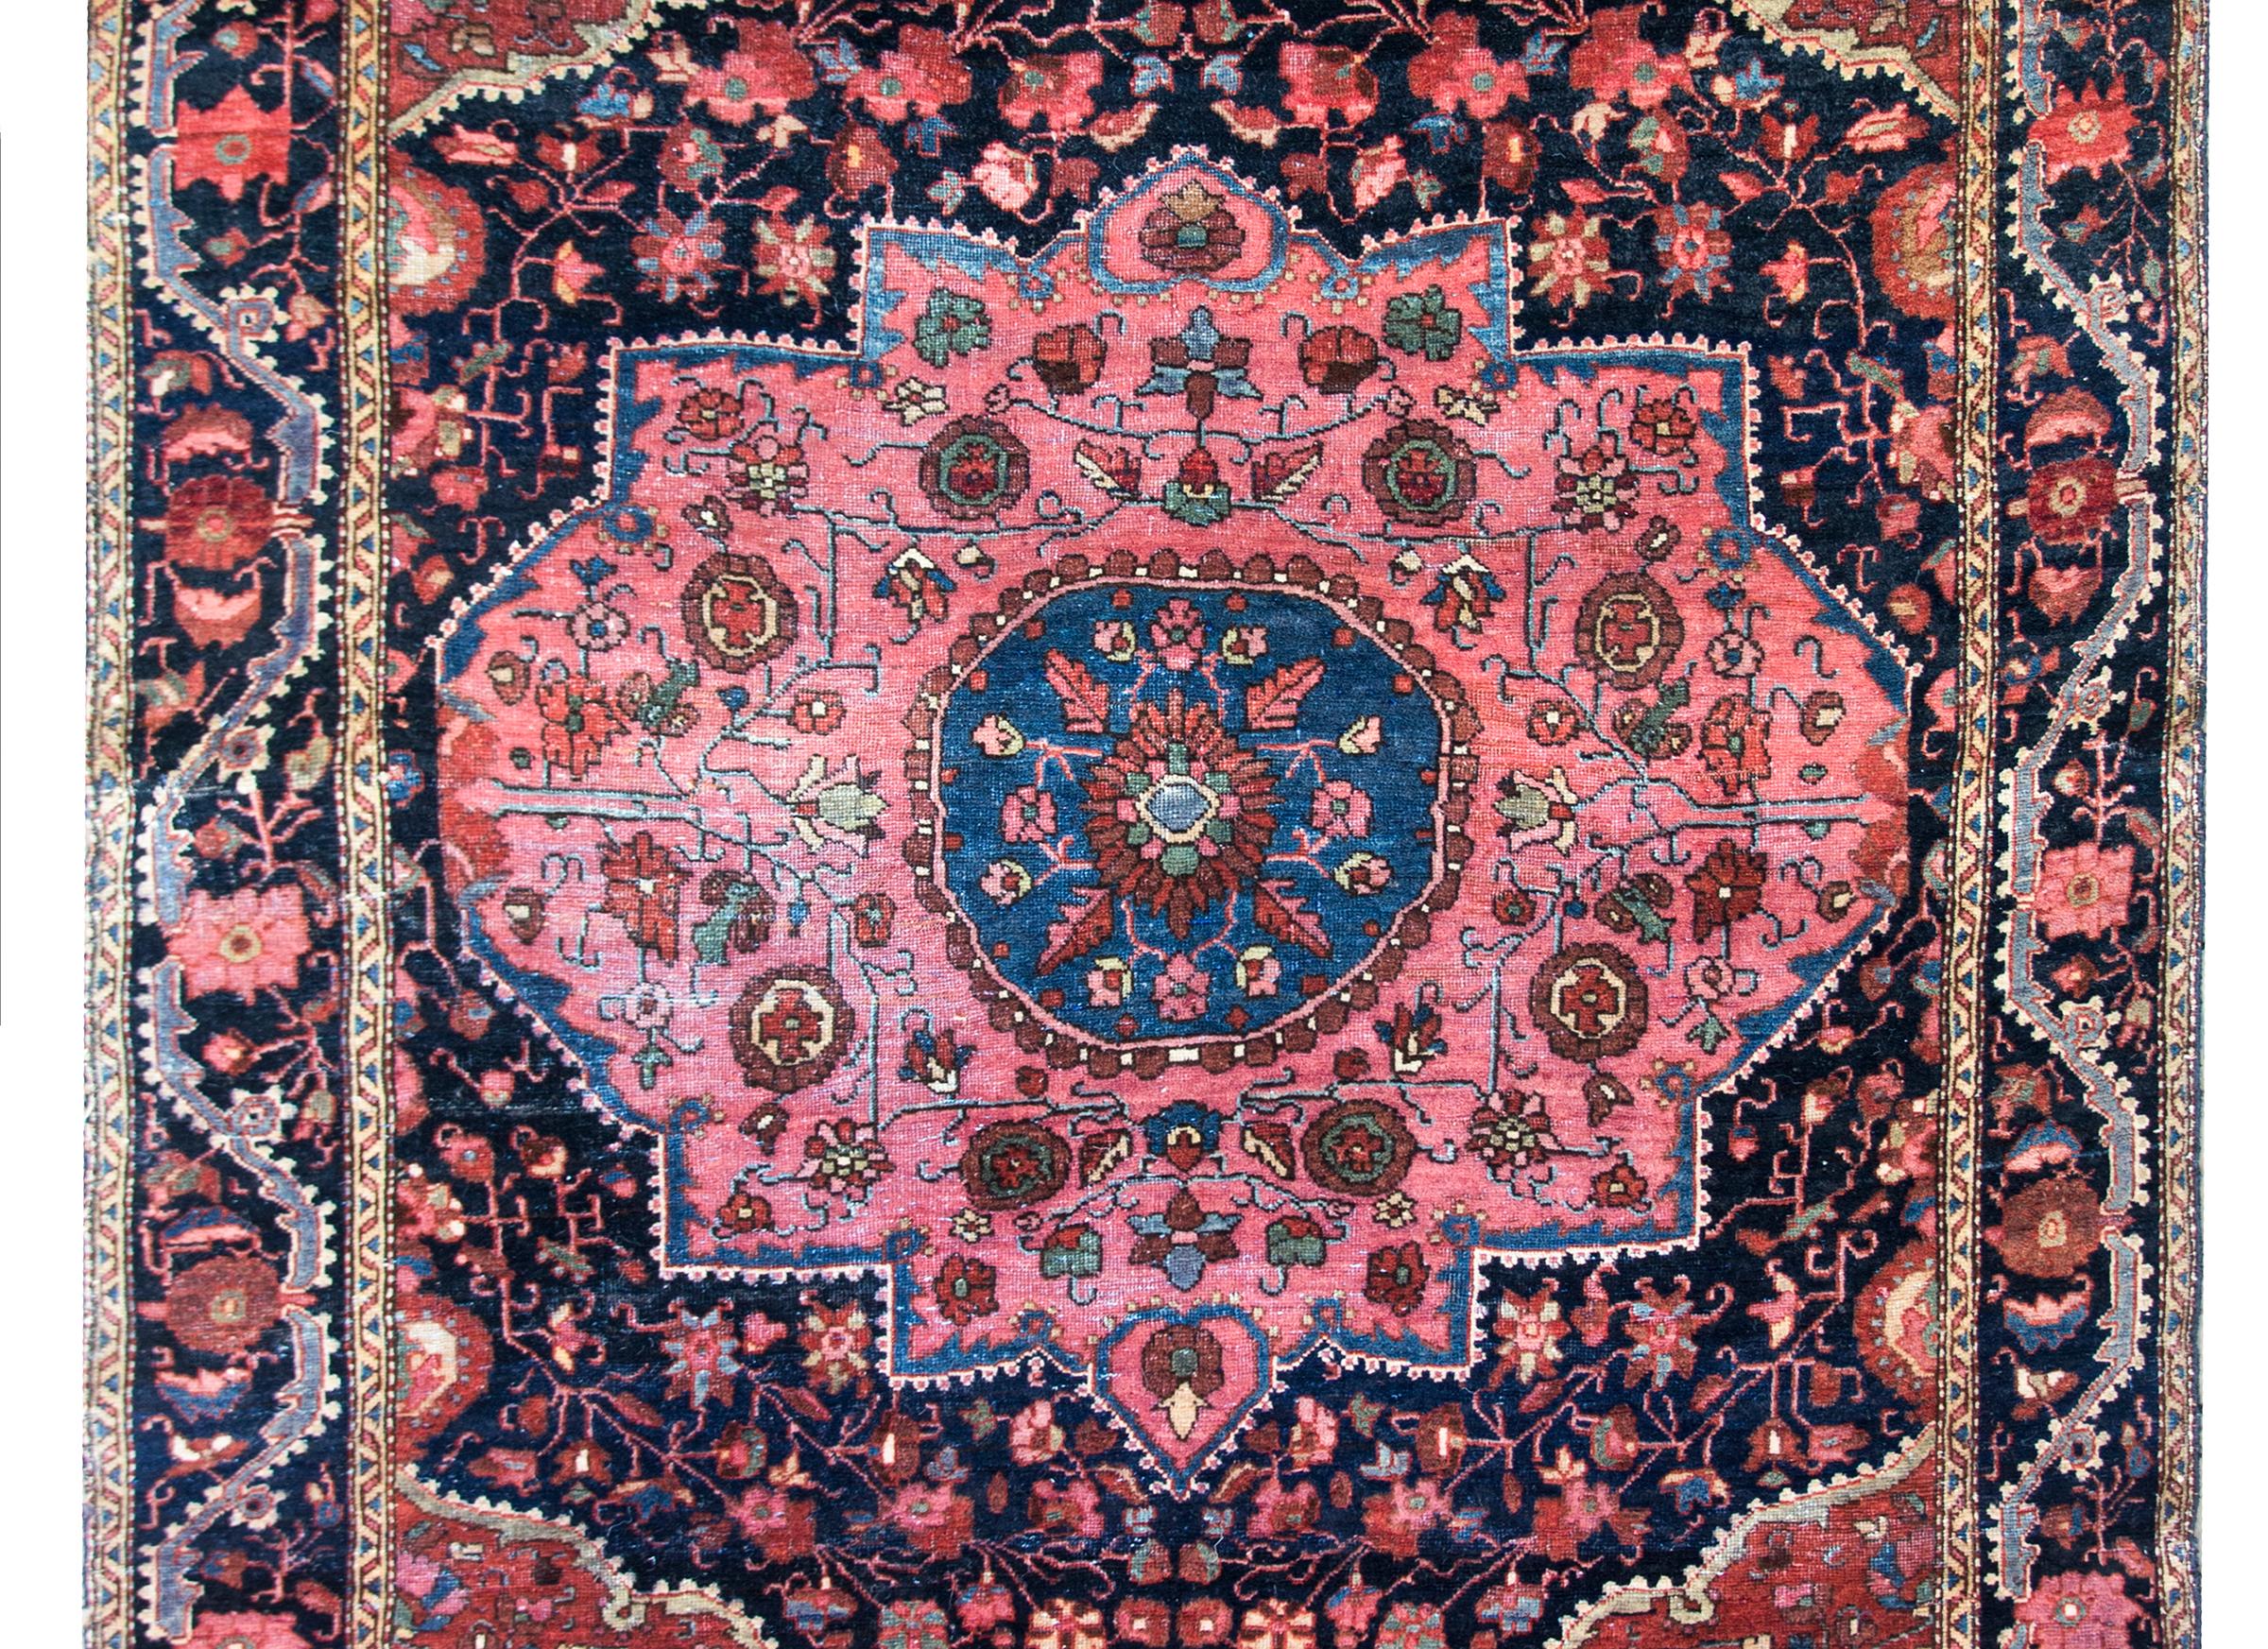 A wonderful early 20th century Persian Sarouk Farahan rug with a large central floral medallion with stylized flowers, leaves, and scrolling vines set amidst a field of more densely woven flowers and vines, all woven in light and dark indigo, pink,